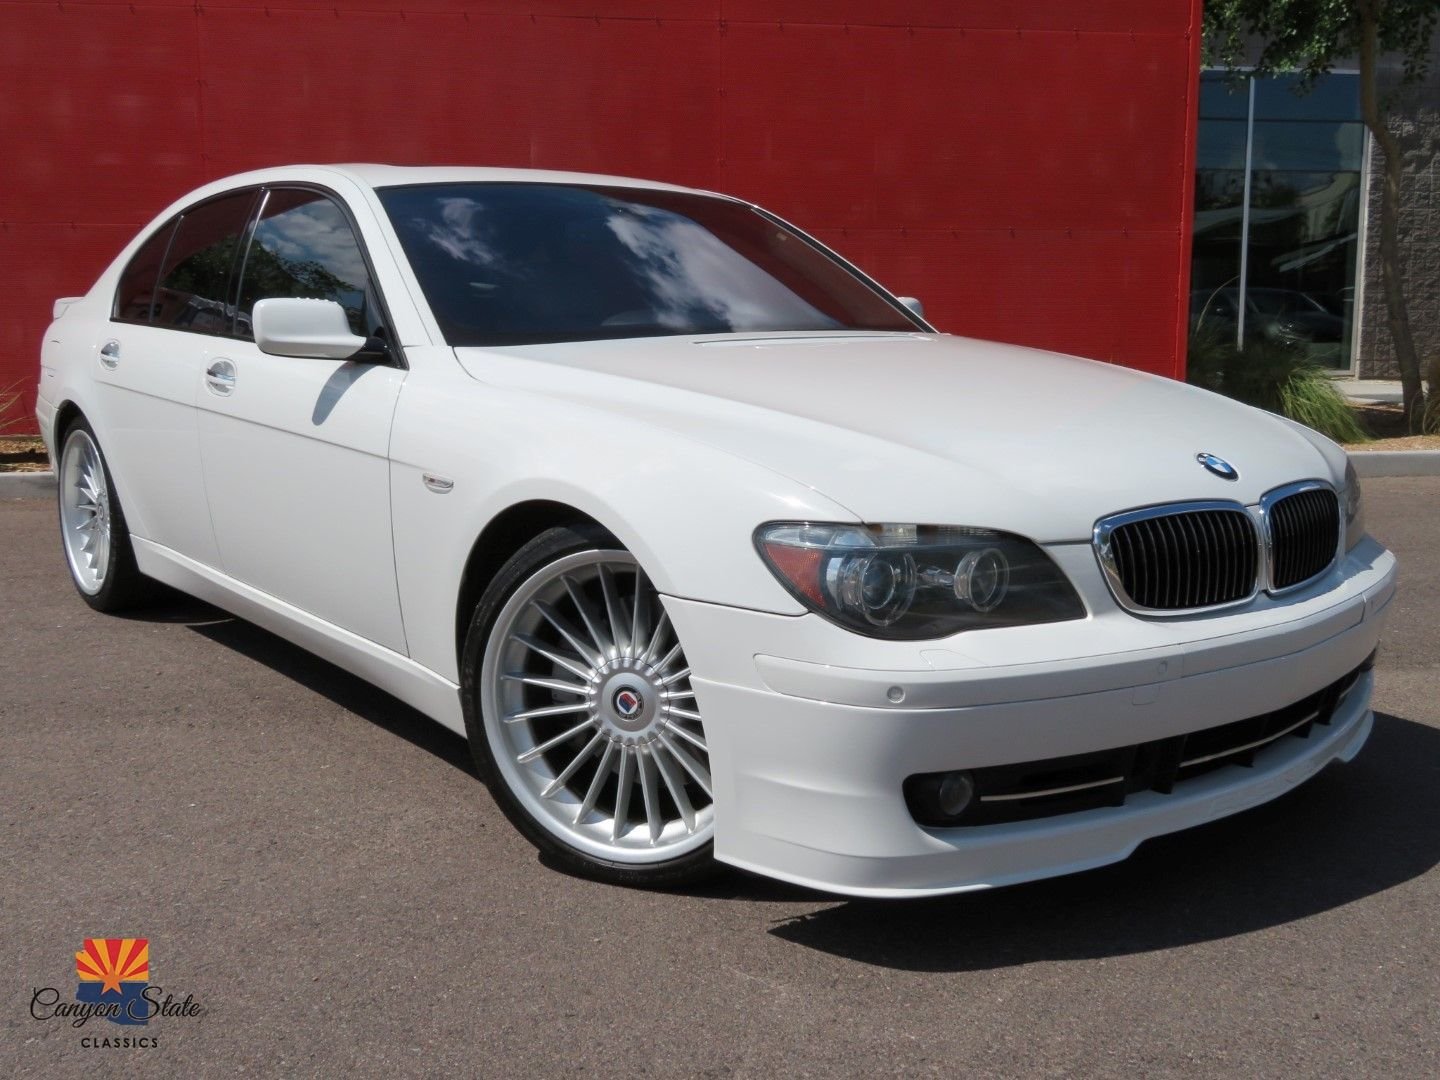 2007 BMW 7 Series | Canyon State Classics